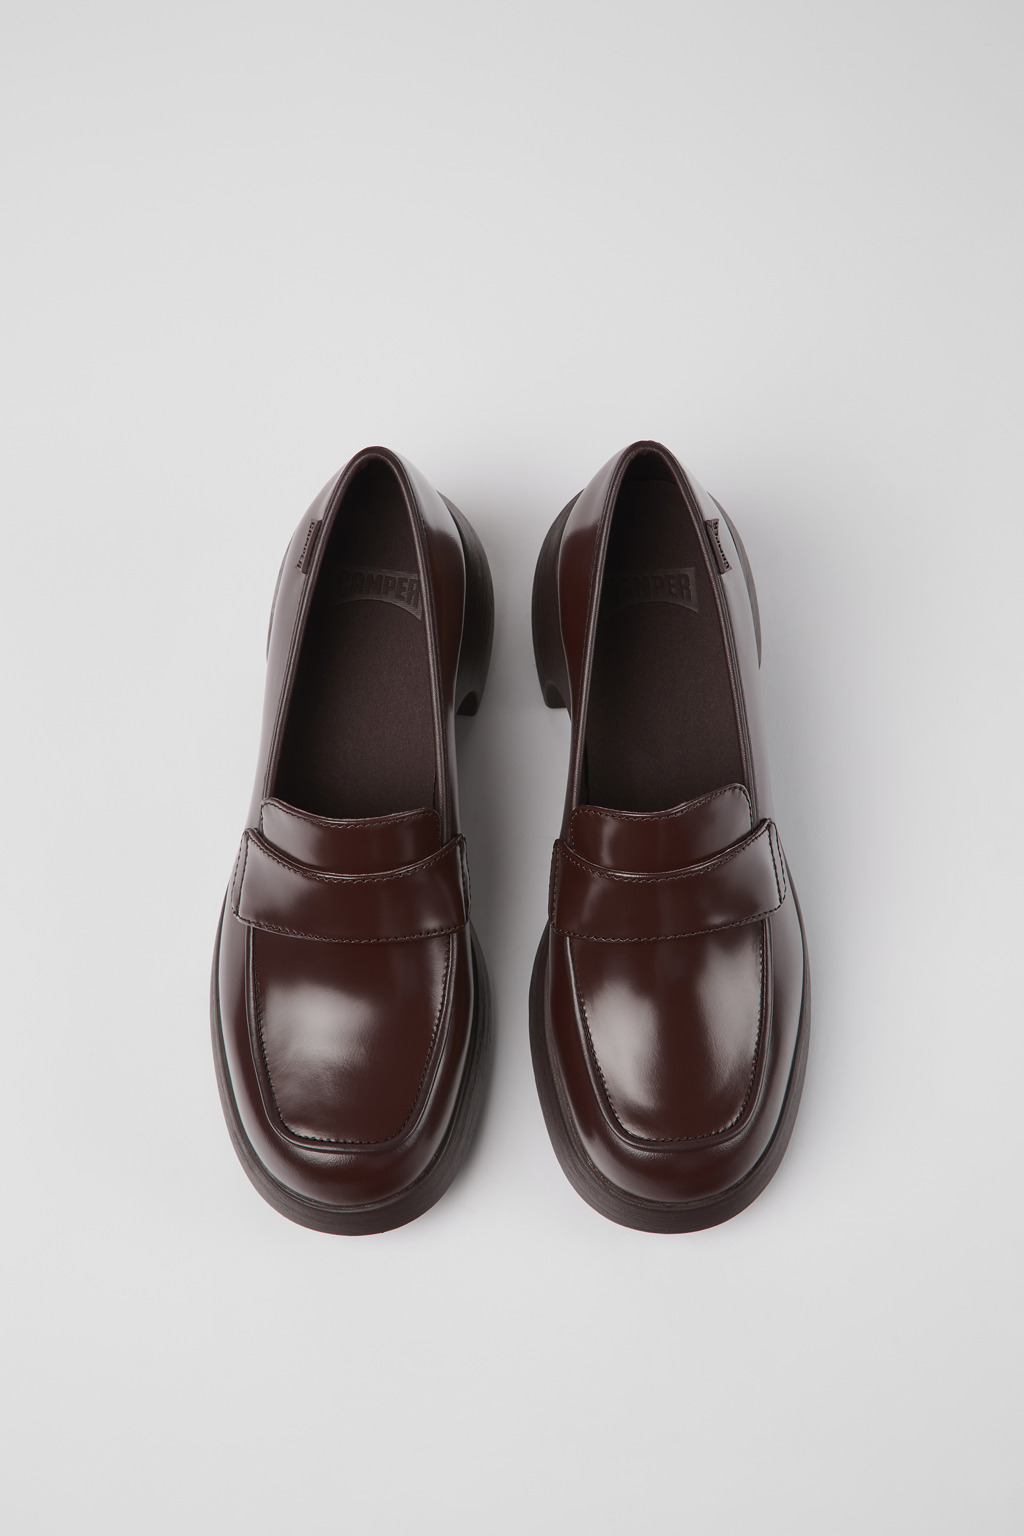 Thelma Burgundy Loafers for Women - Fall/Winter collection 